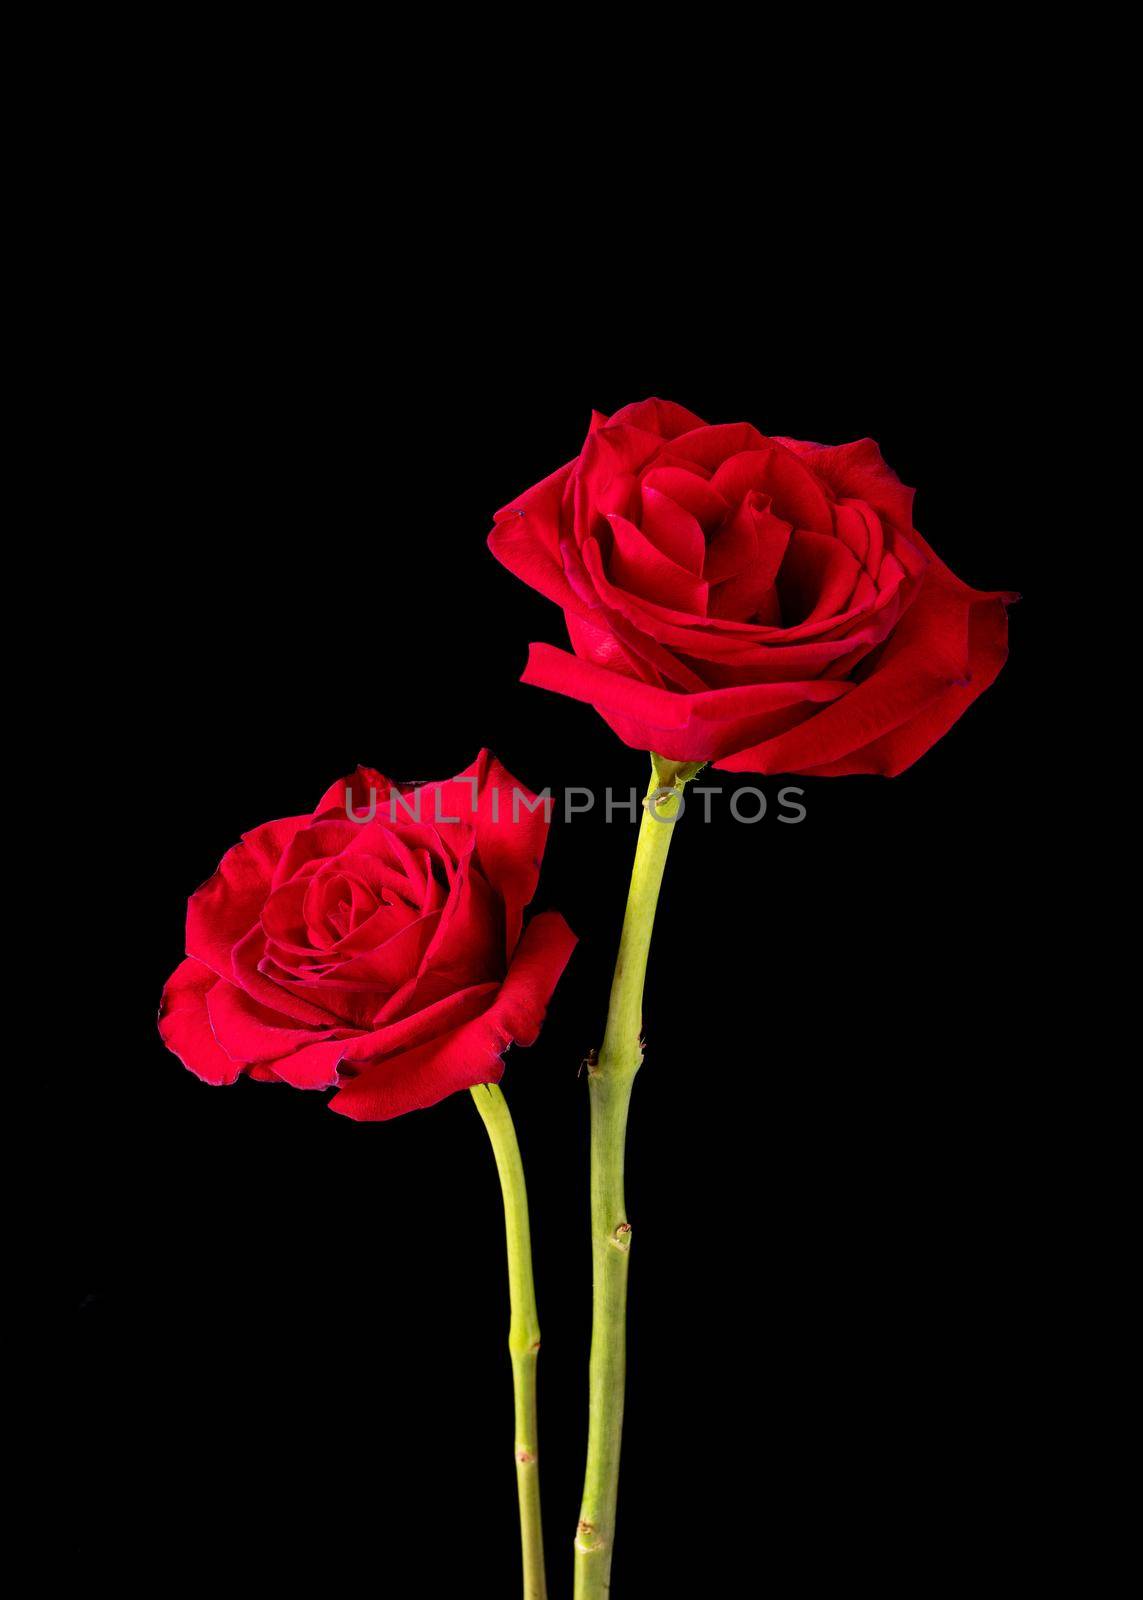 A pair of American Beauty rose blossoms pictured against a black background.